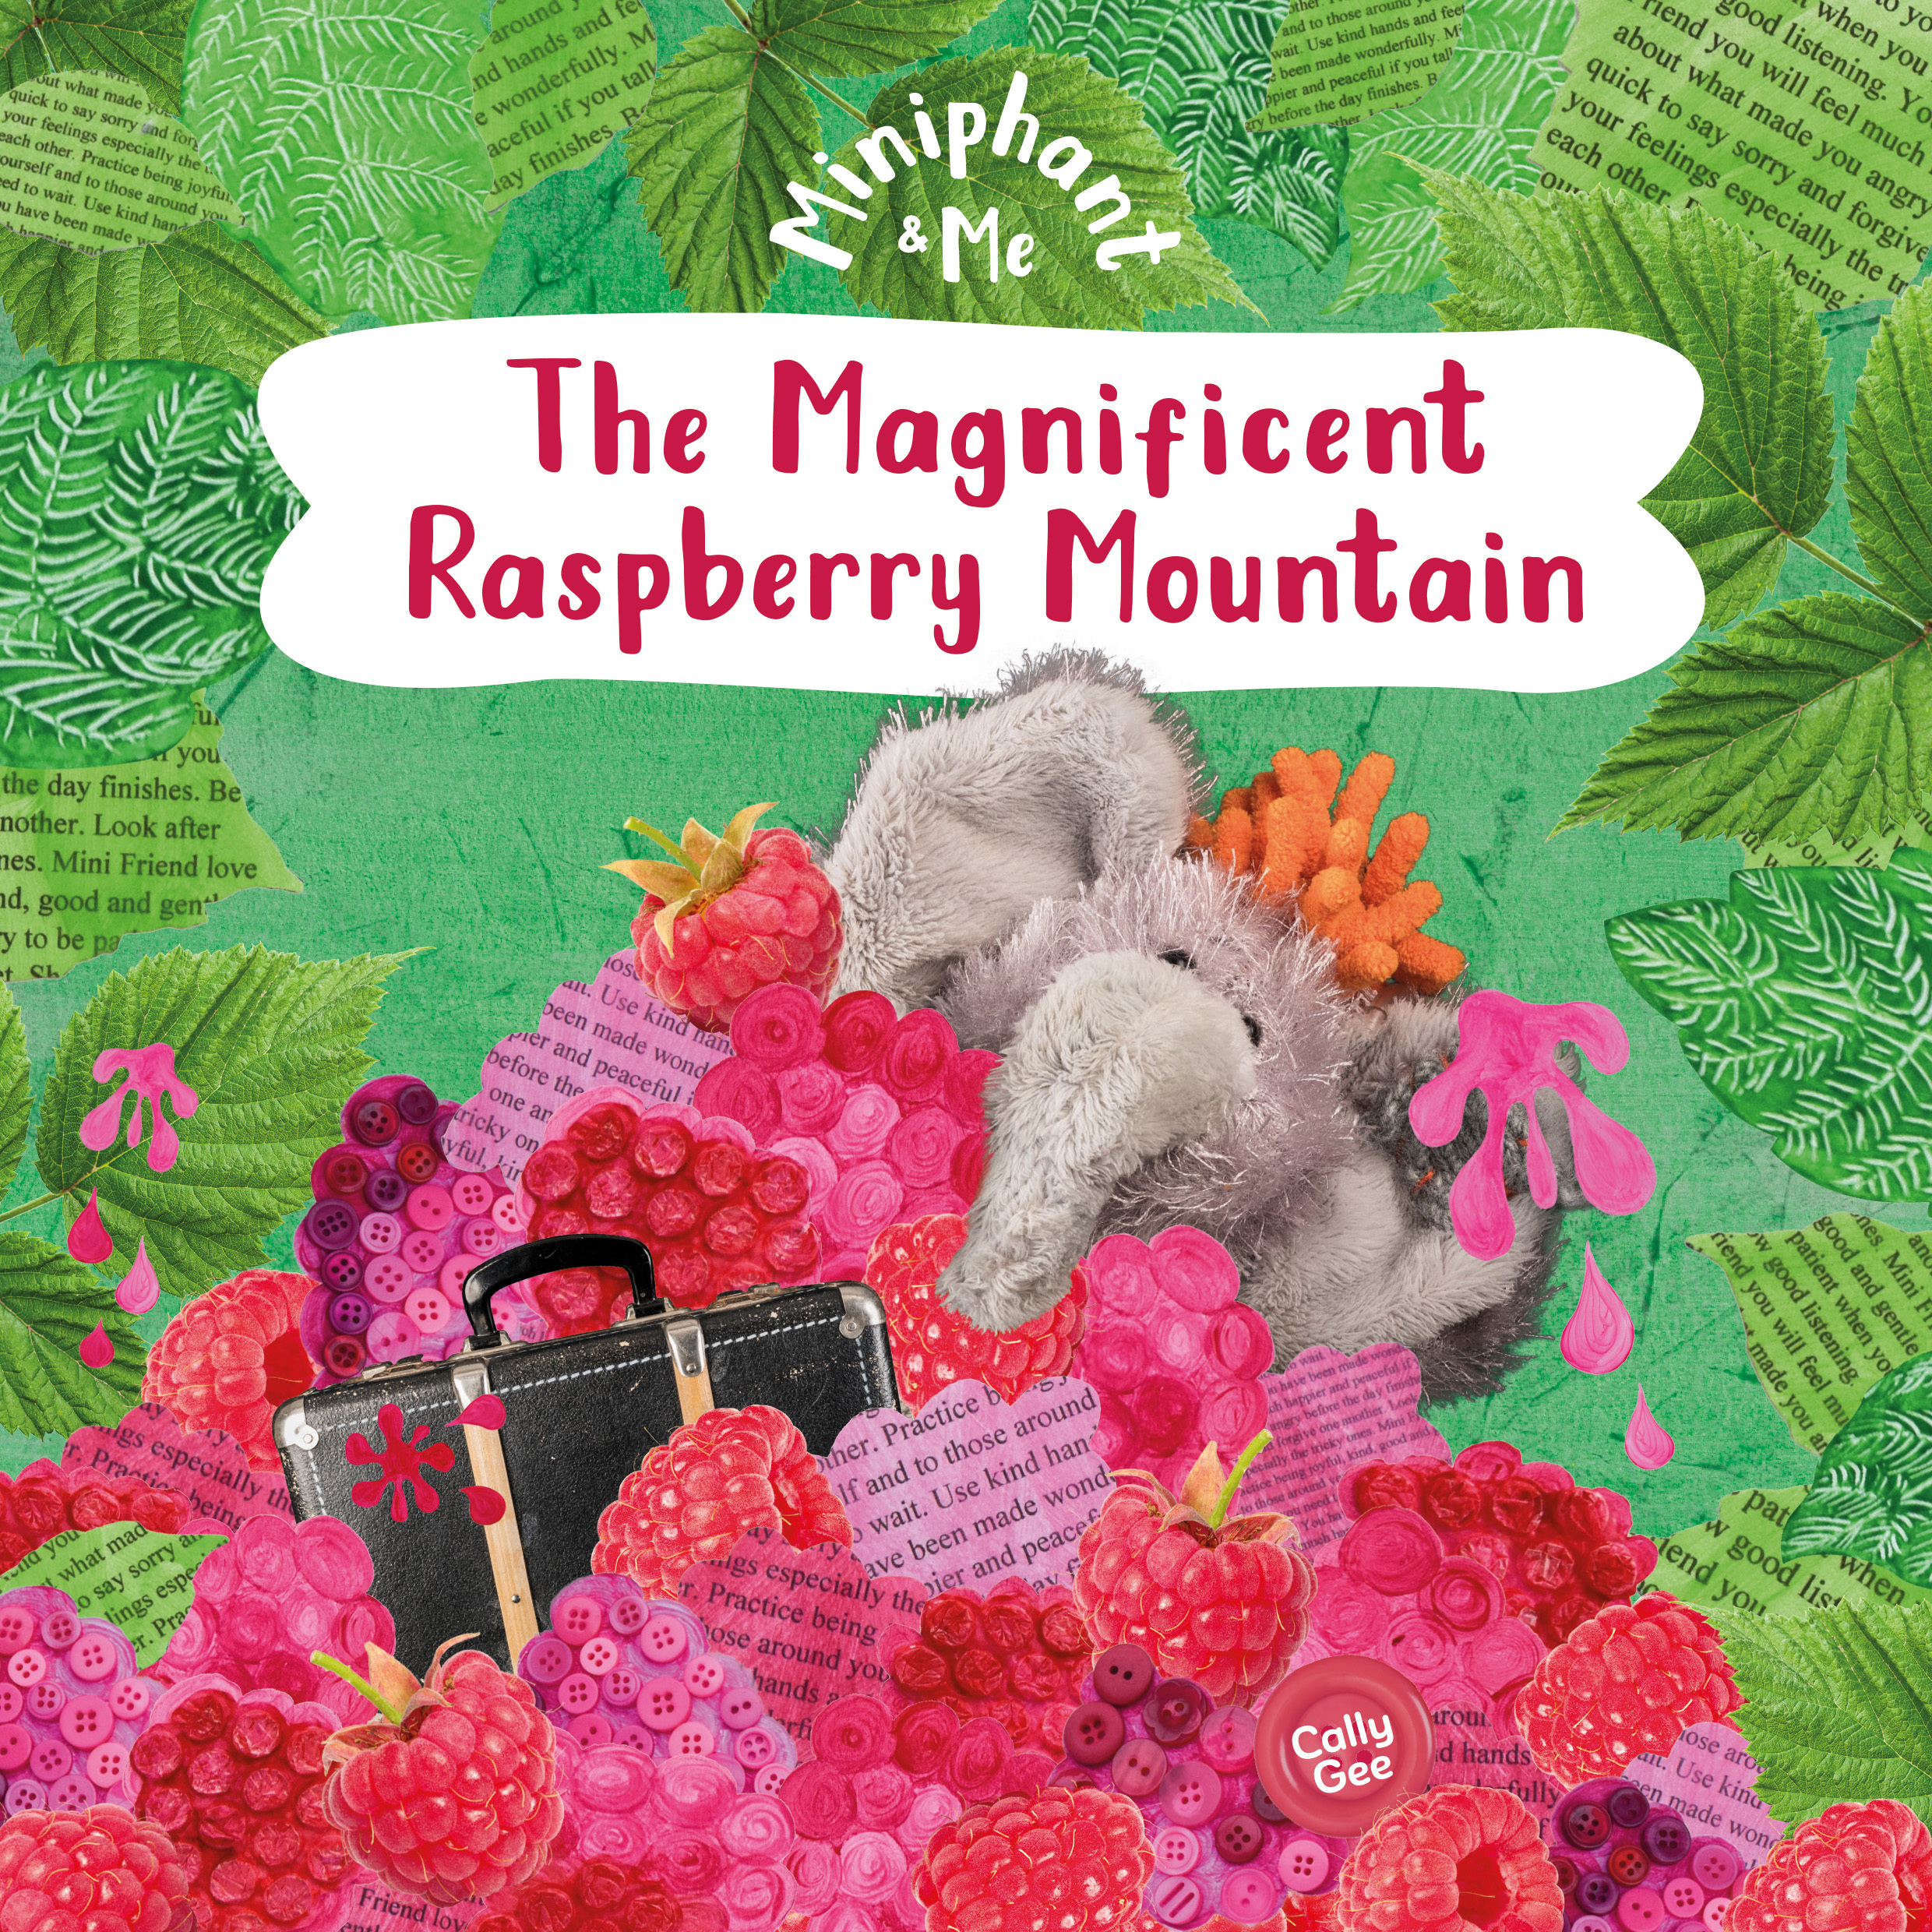 More information on Miniphant & Me The Magnificent Raspberry Mountain